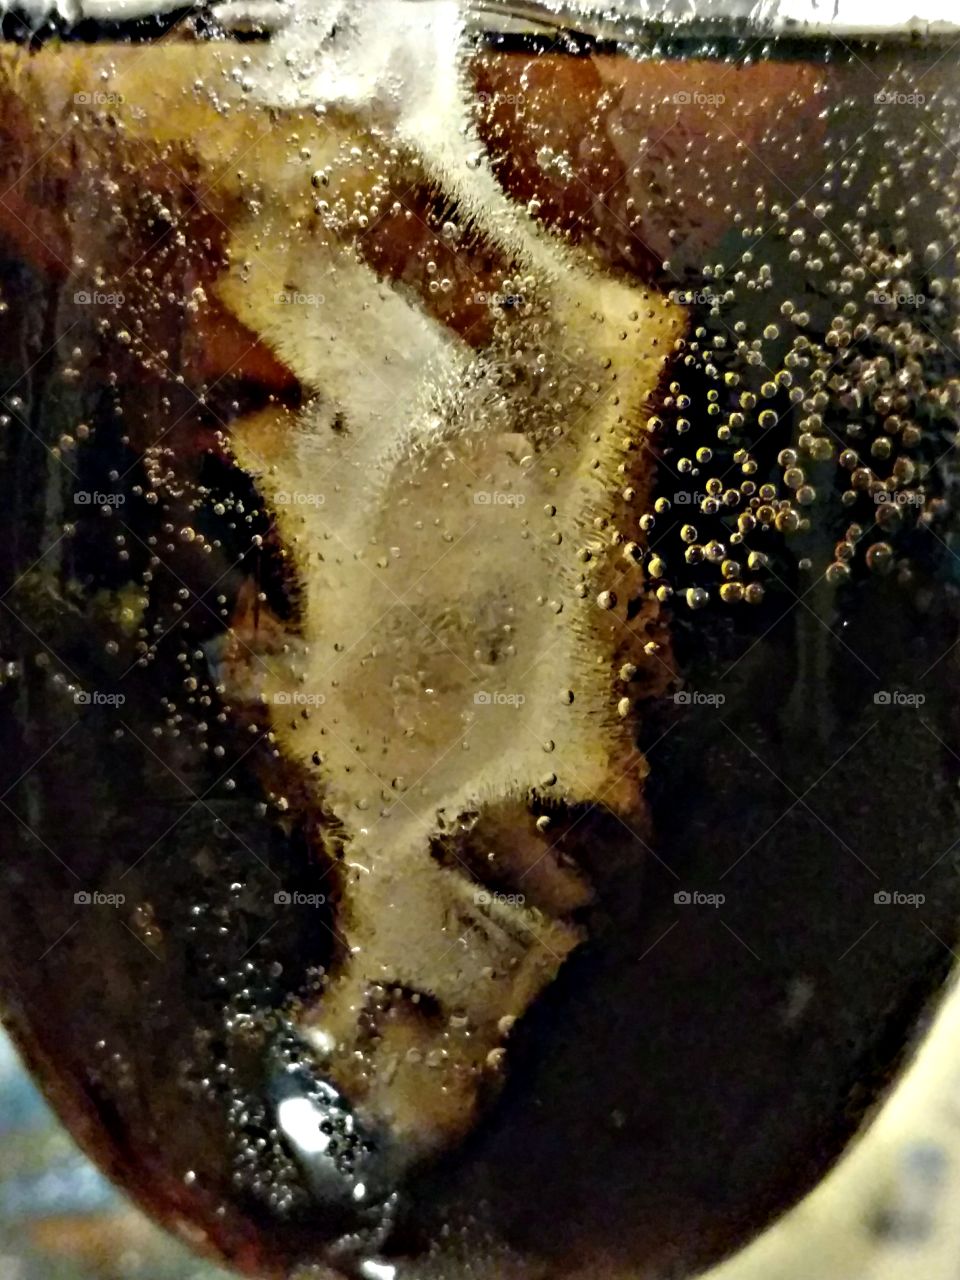 ice and soda